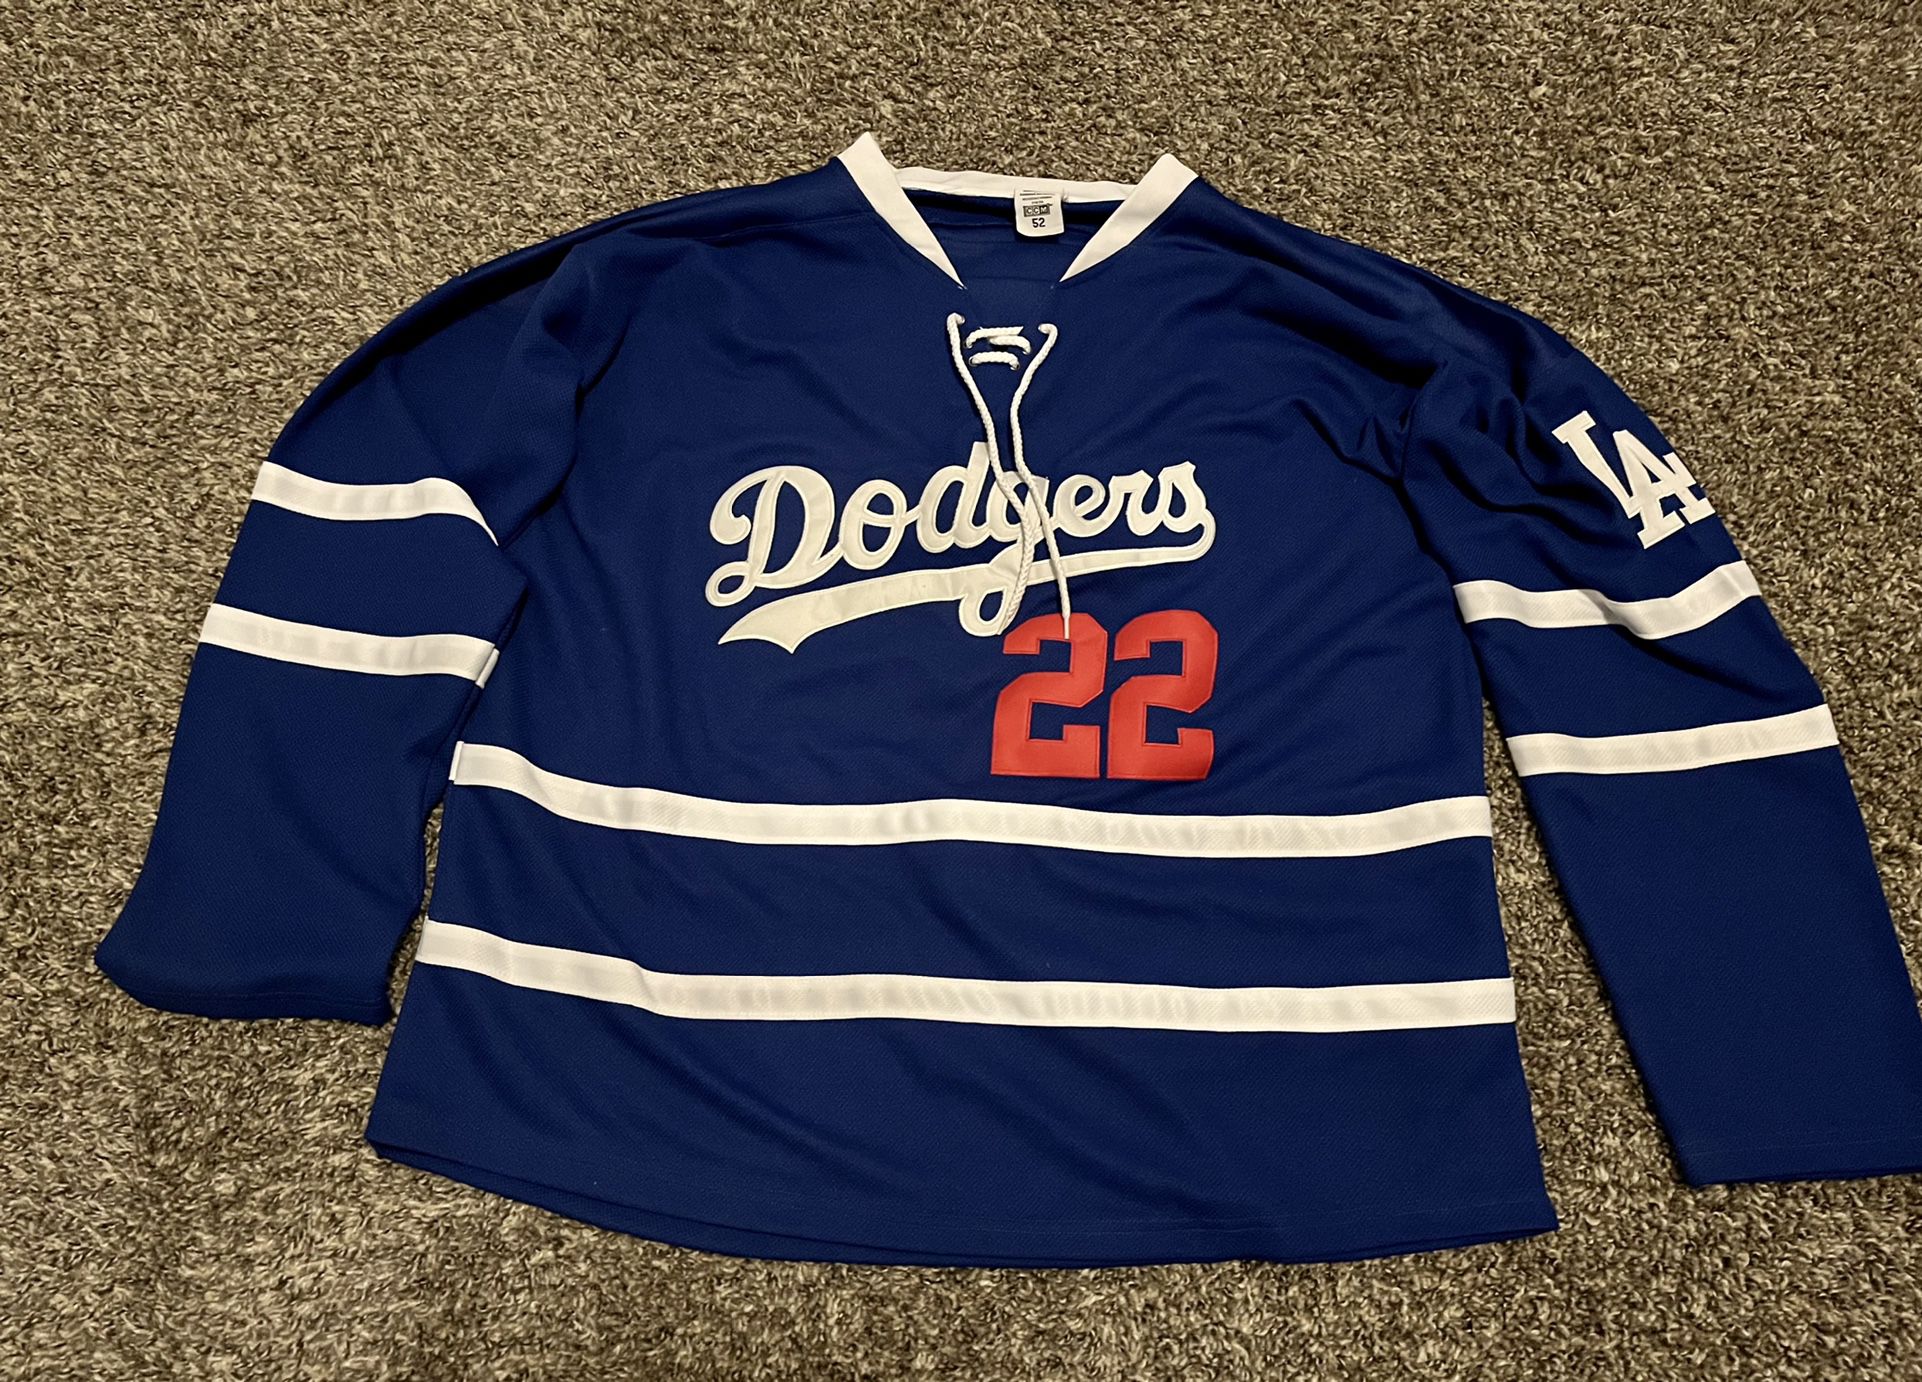 dodgers and kings jersey